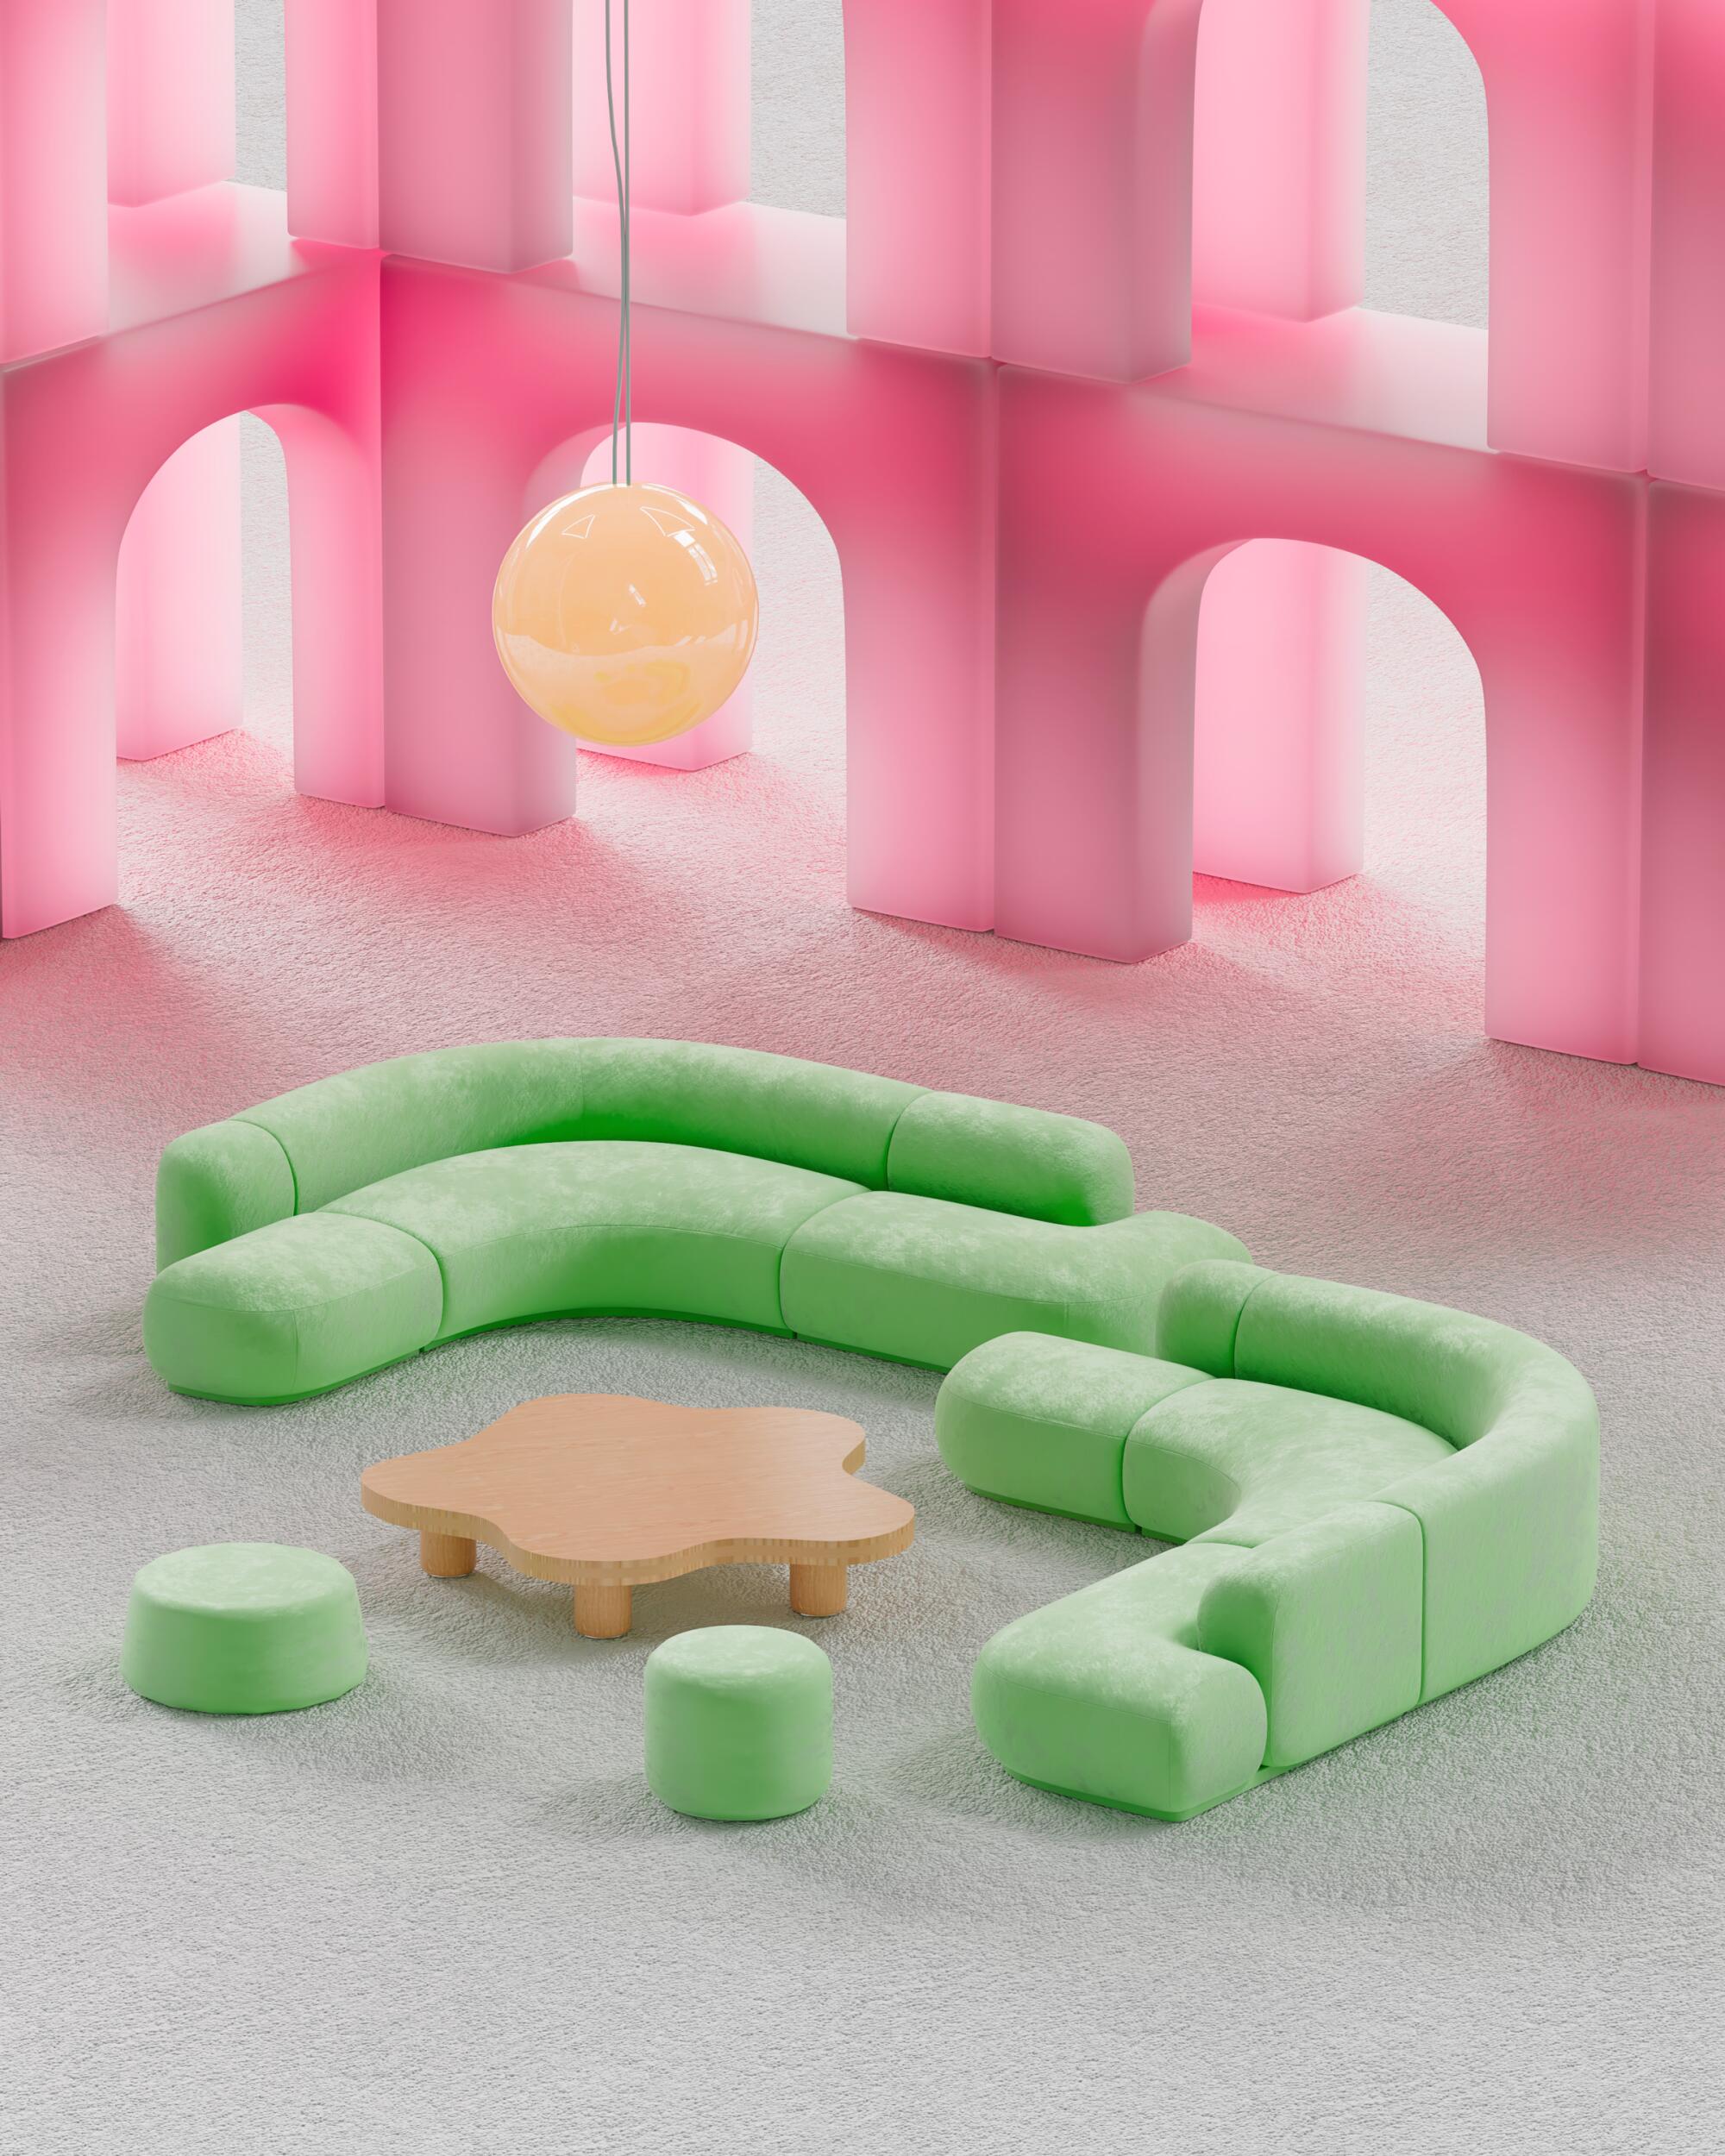 A lime green rounded sectional couch set in an abstracted living room space surrounded by stacked pink archways